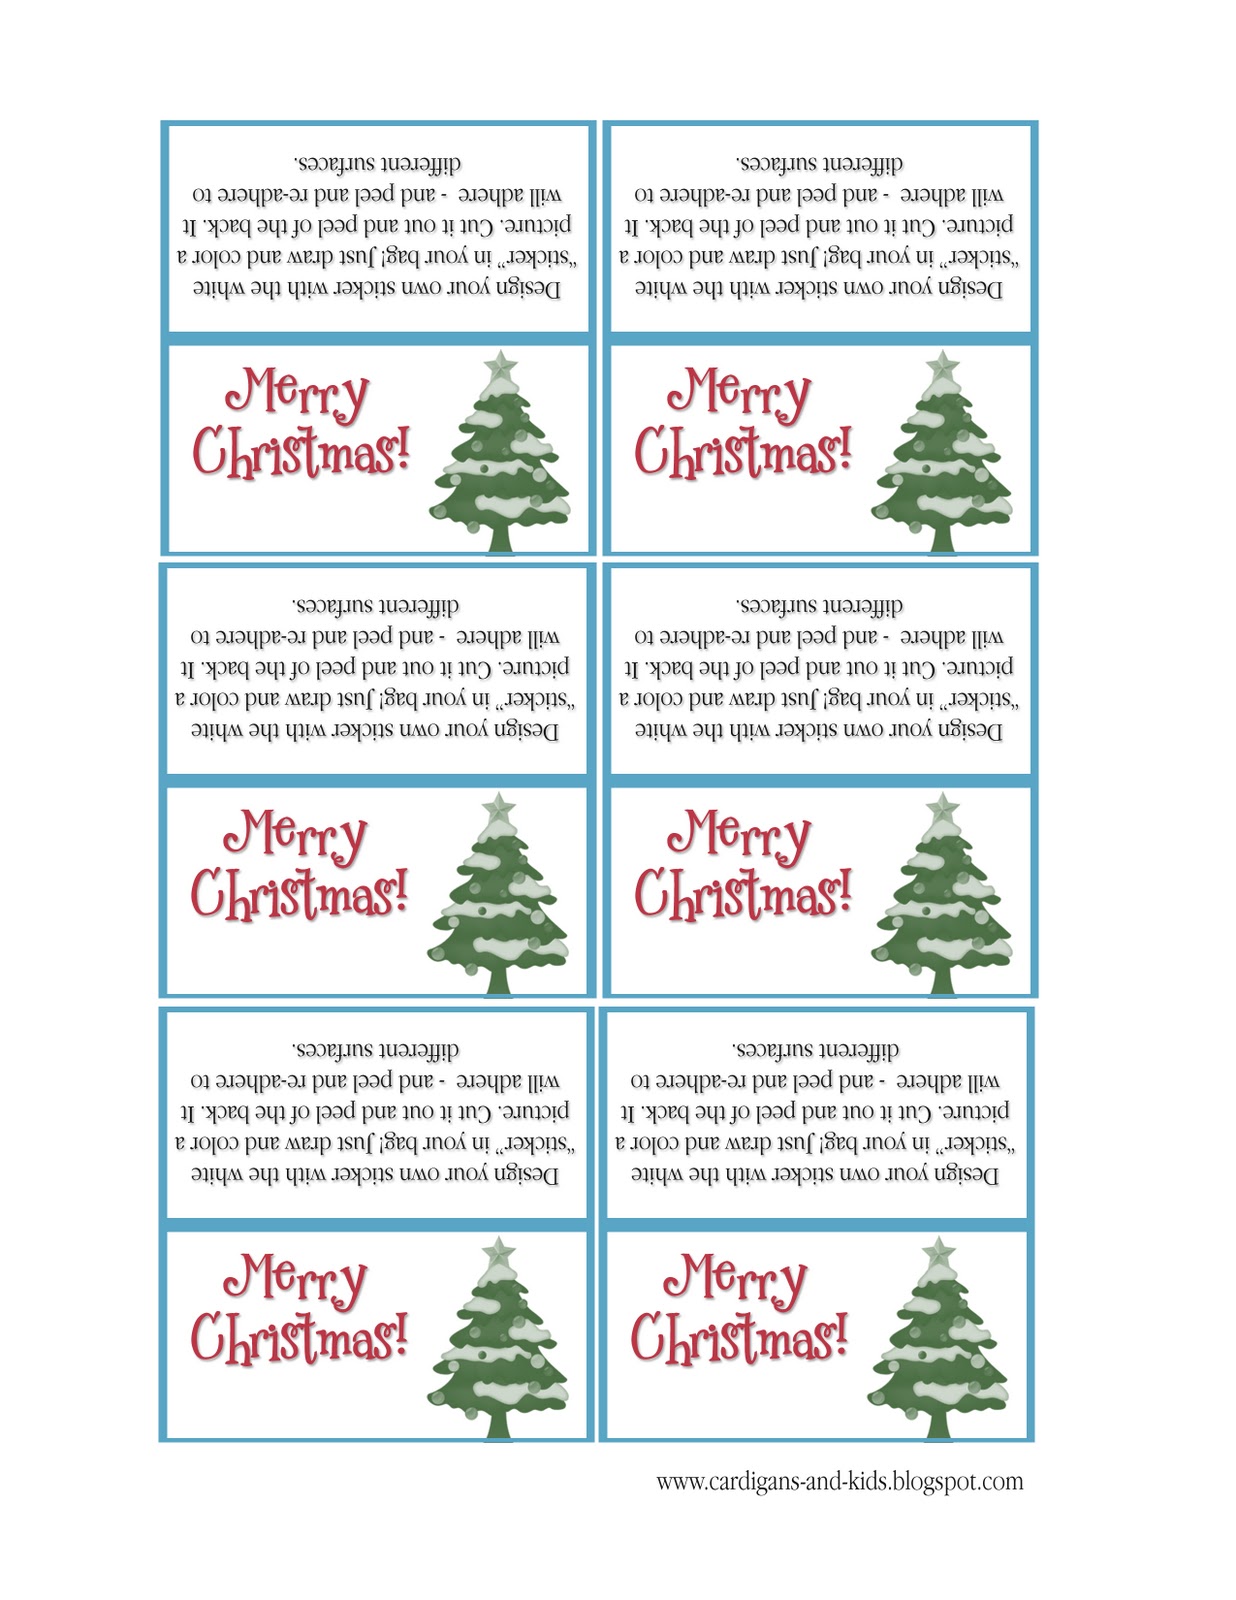 free-holiday-return-address-template-search-results-calendar-2015